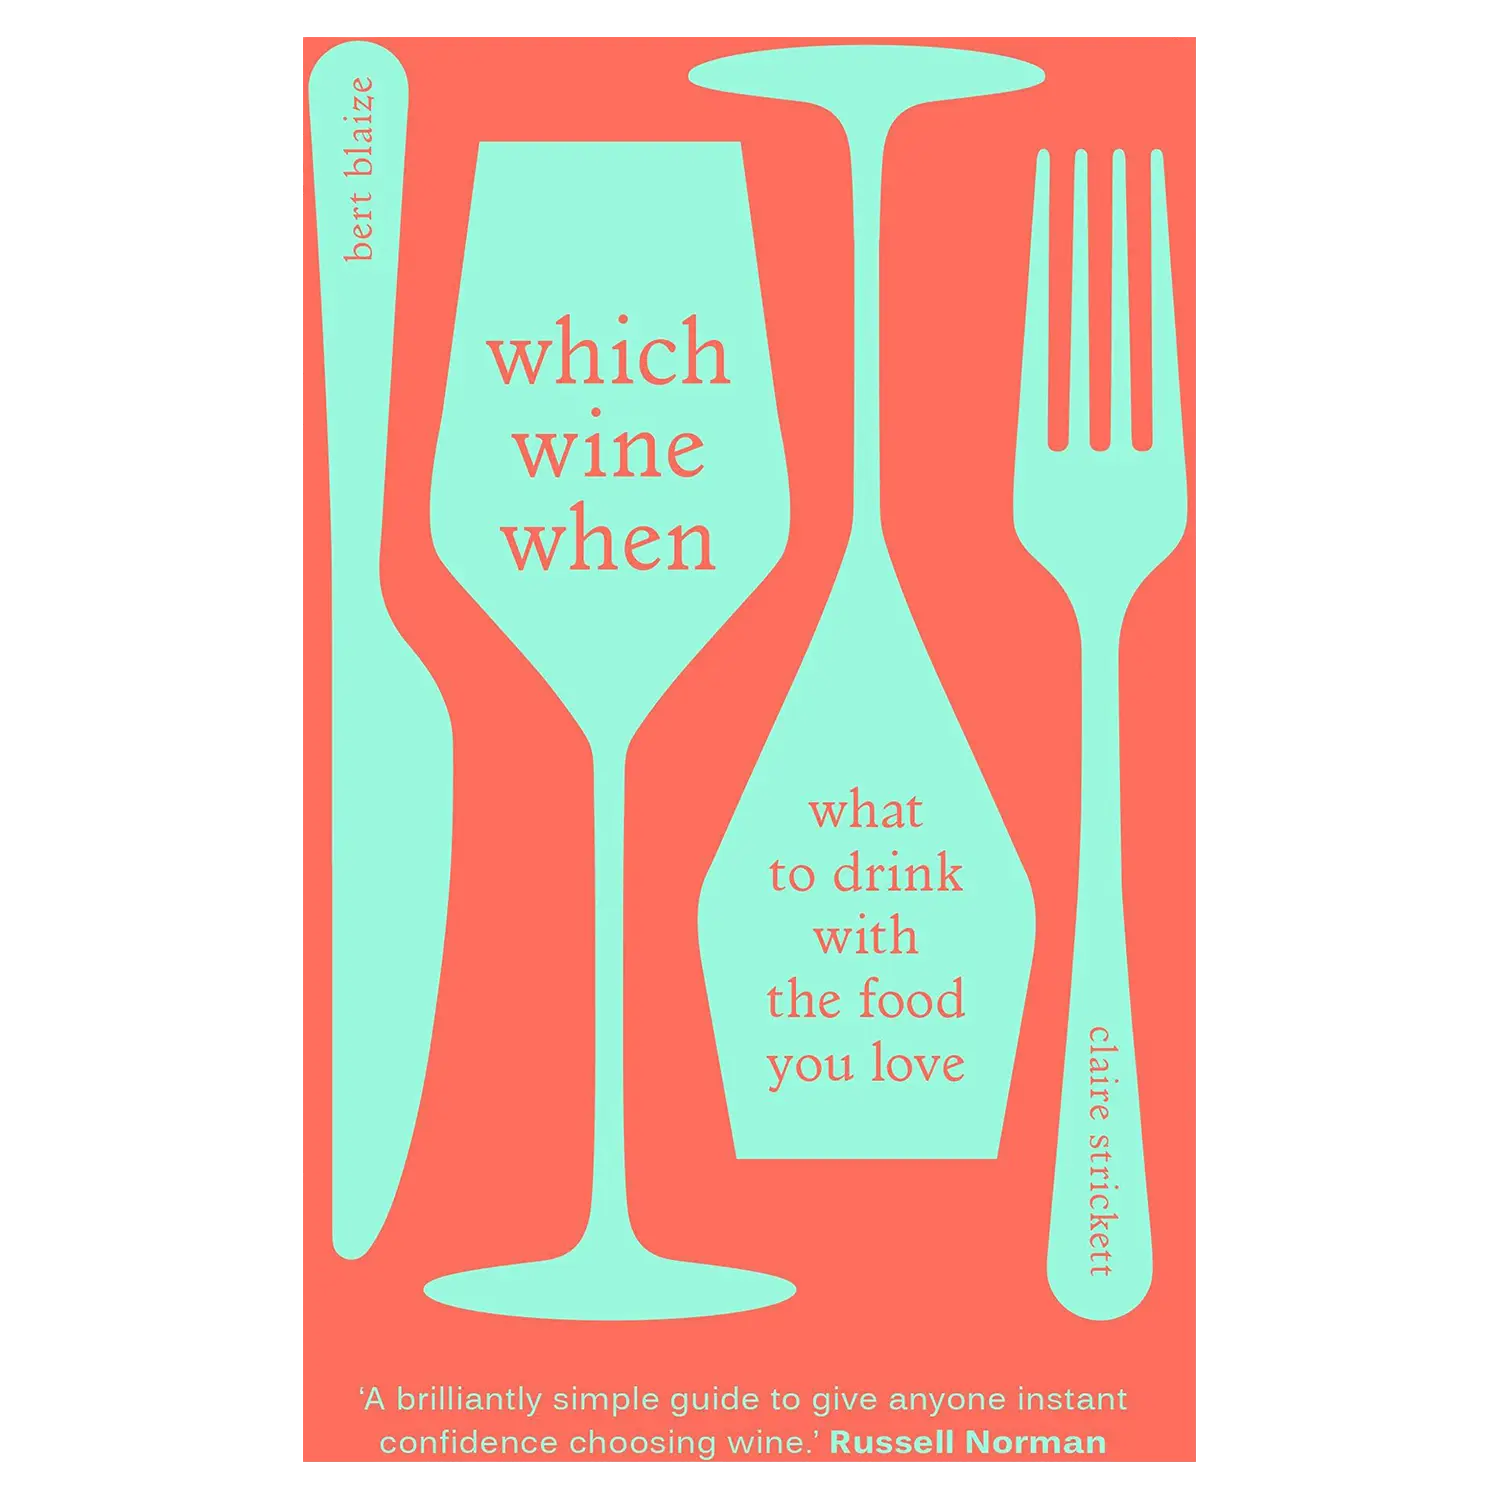 Which Wine When - What to drink with the food you love by Bert Blaize & Claire Strickett